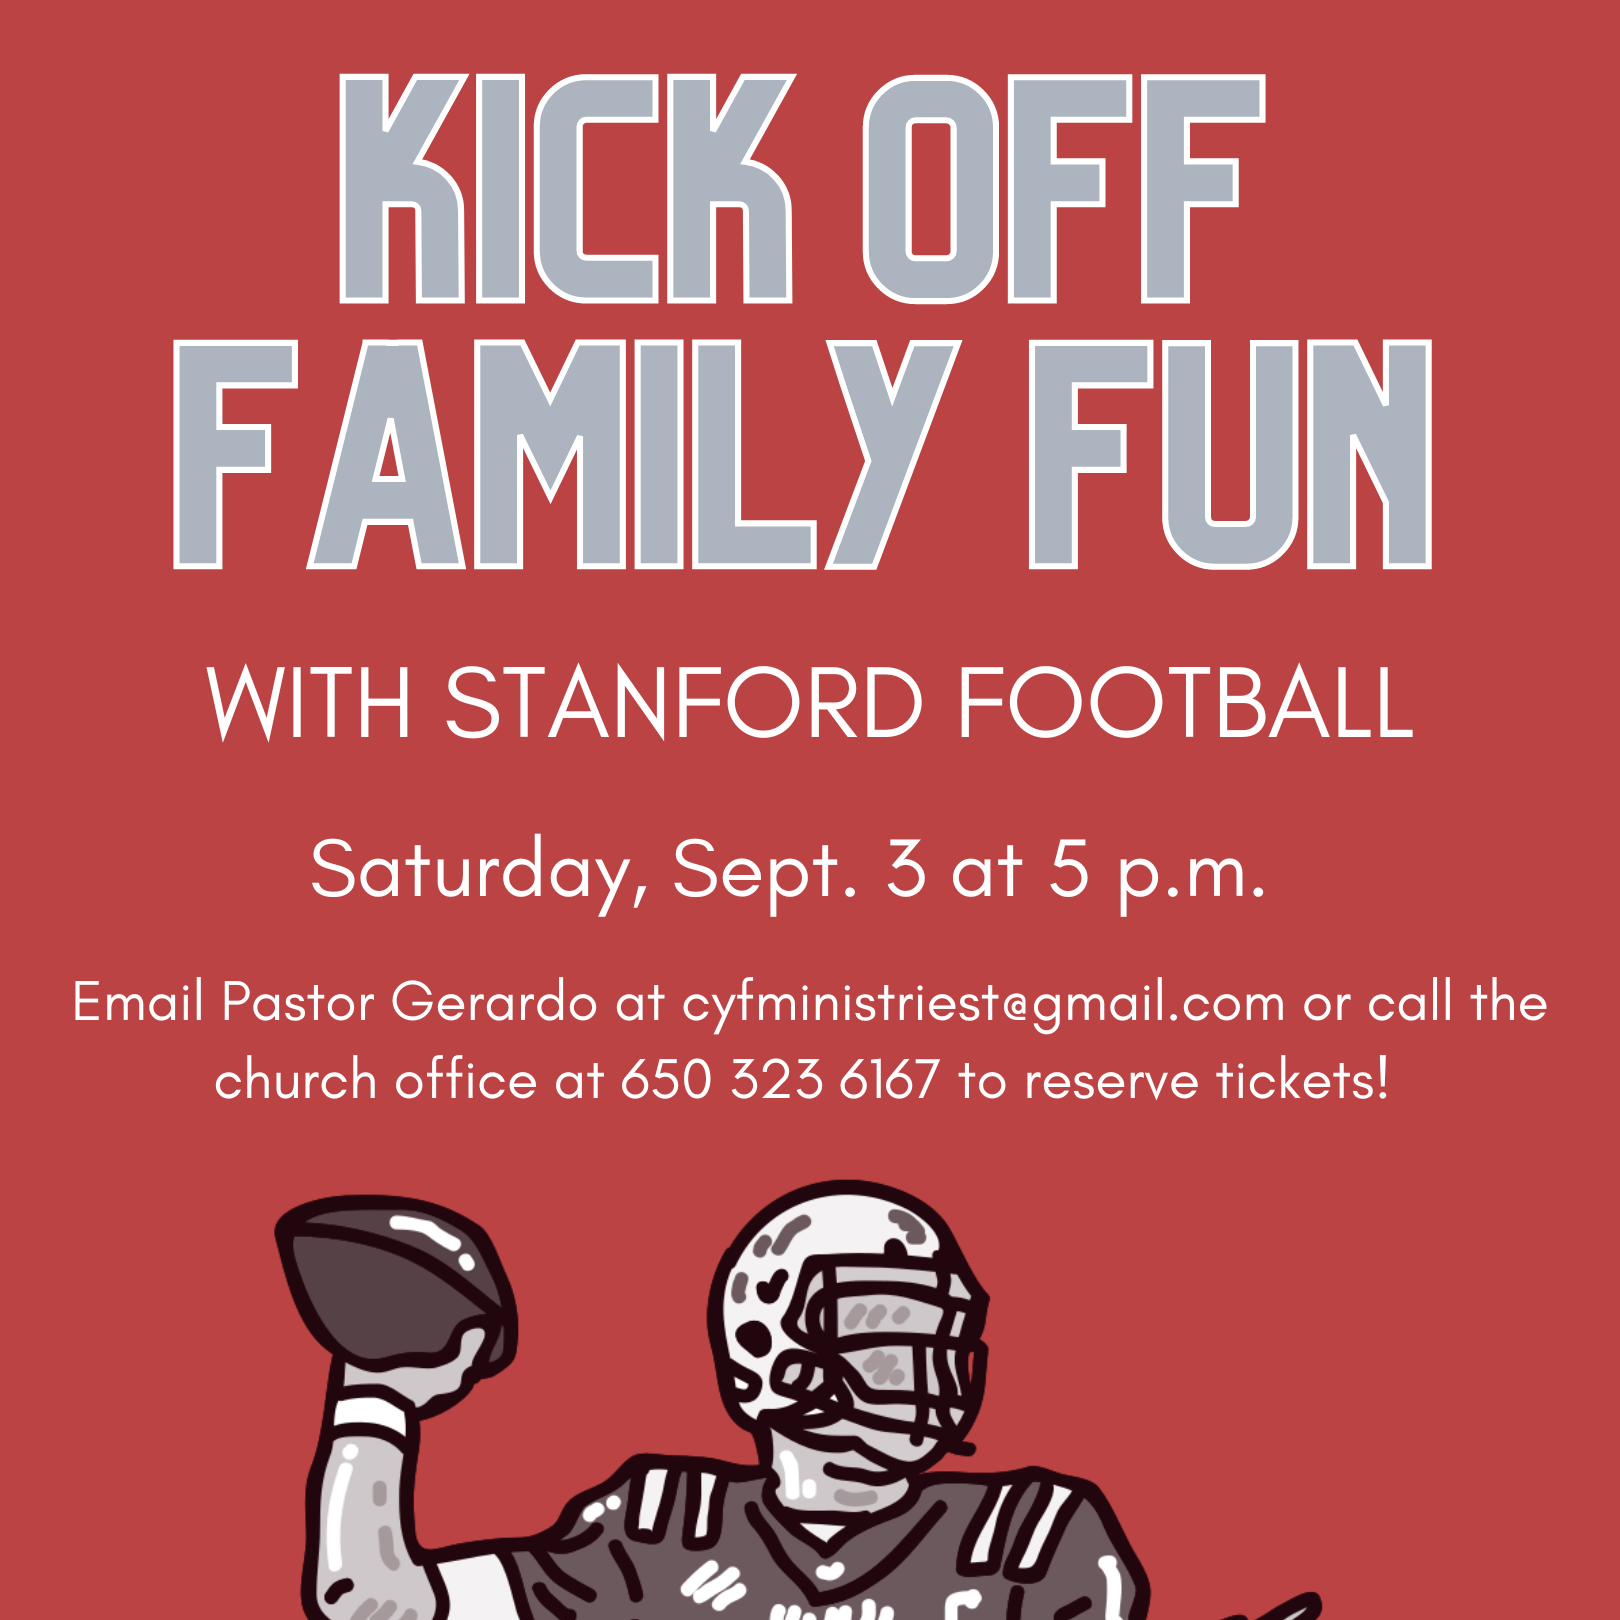 Kick-Off Family Fun with Stanford Football!